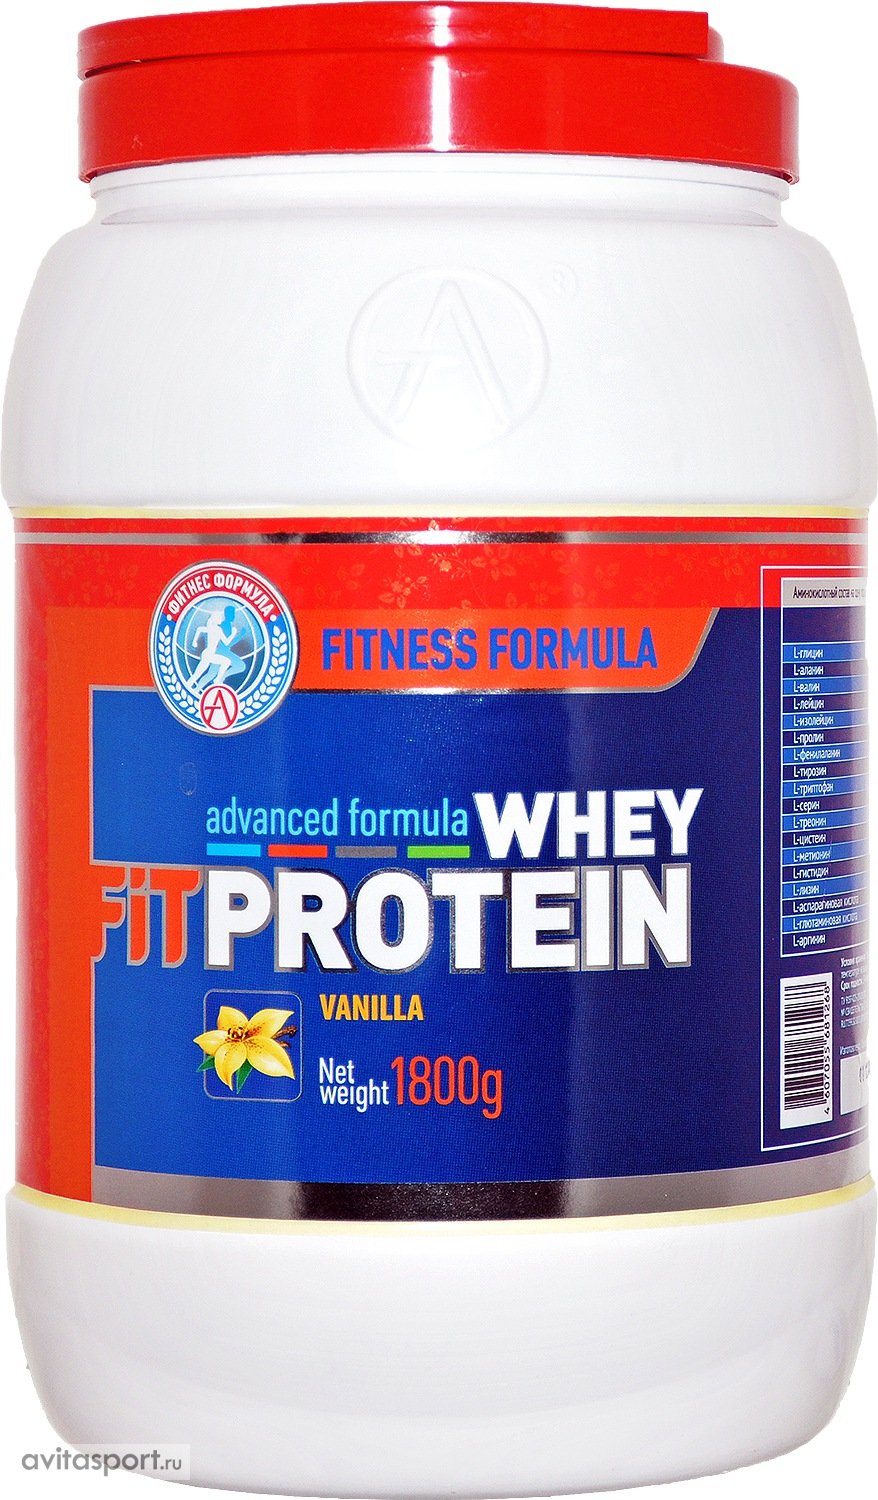 Fit Whey Protein, 1800 g, Academy-T. Whey Concentrate. Mass Gain स्वास्थ्य लाभ Anti-catabolic properties 